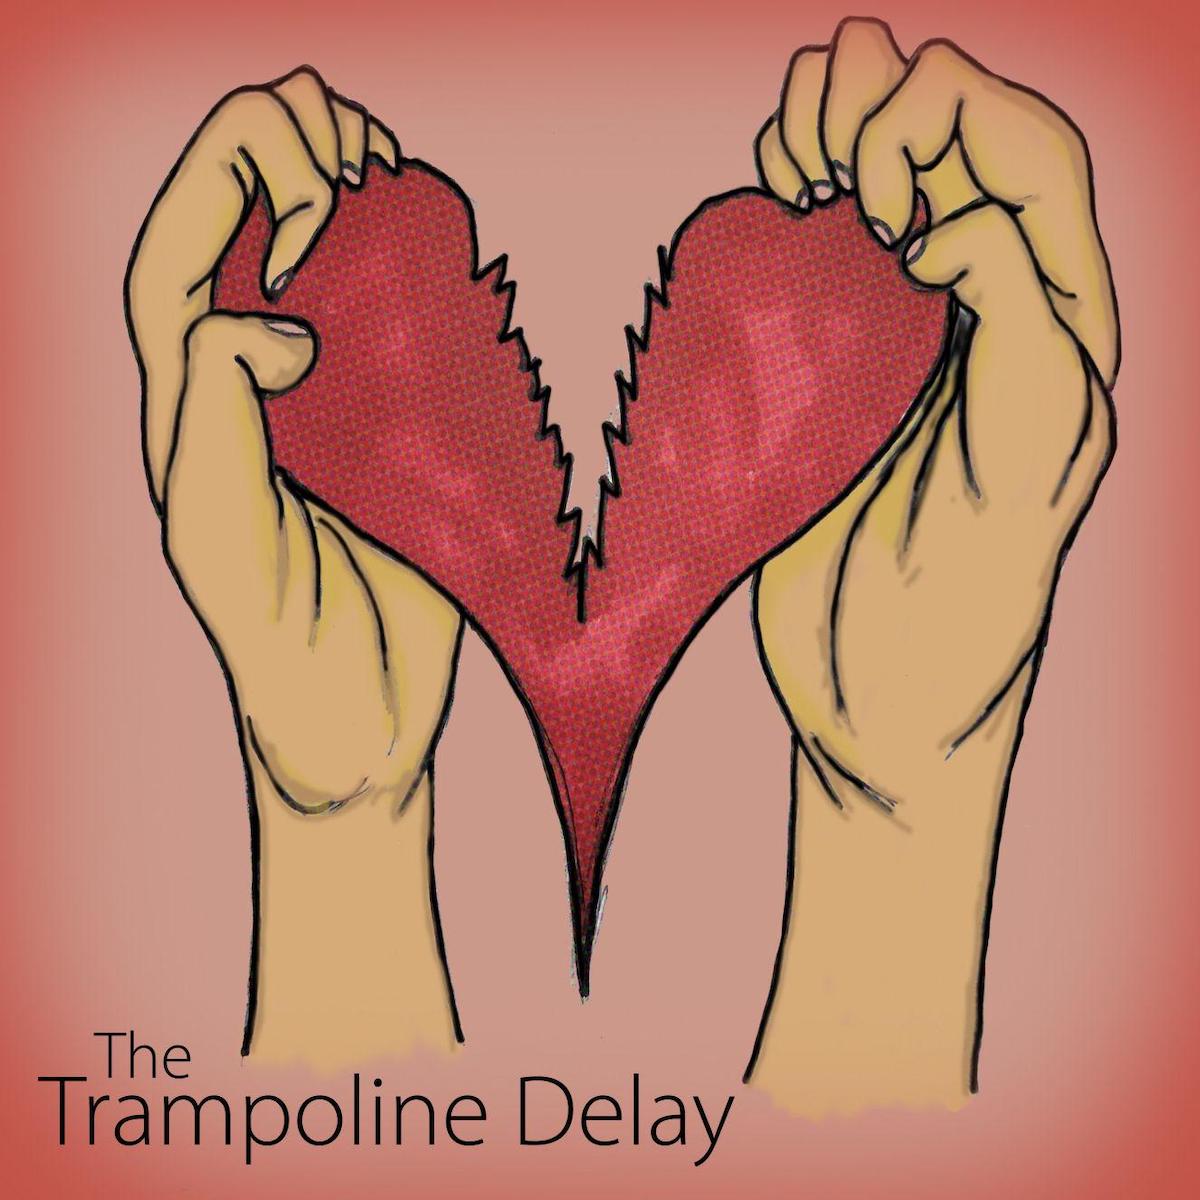 LISTEN: “The Right Stuff” by The Trampoline Delay